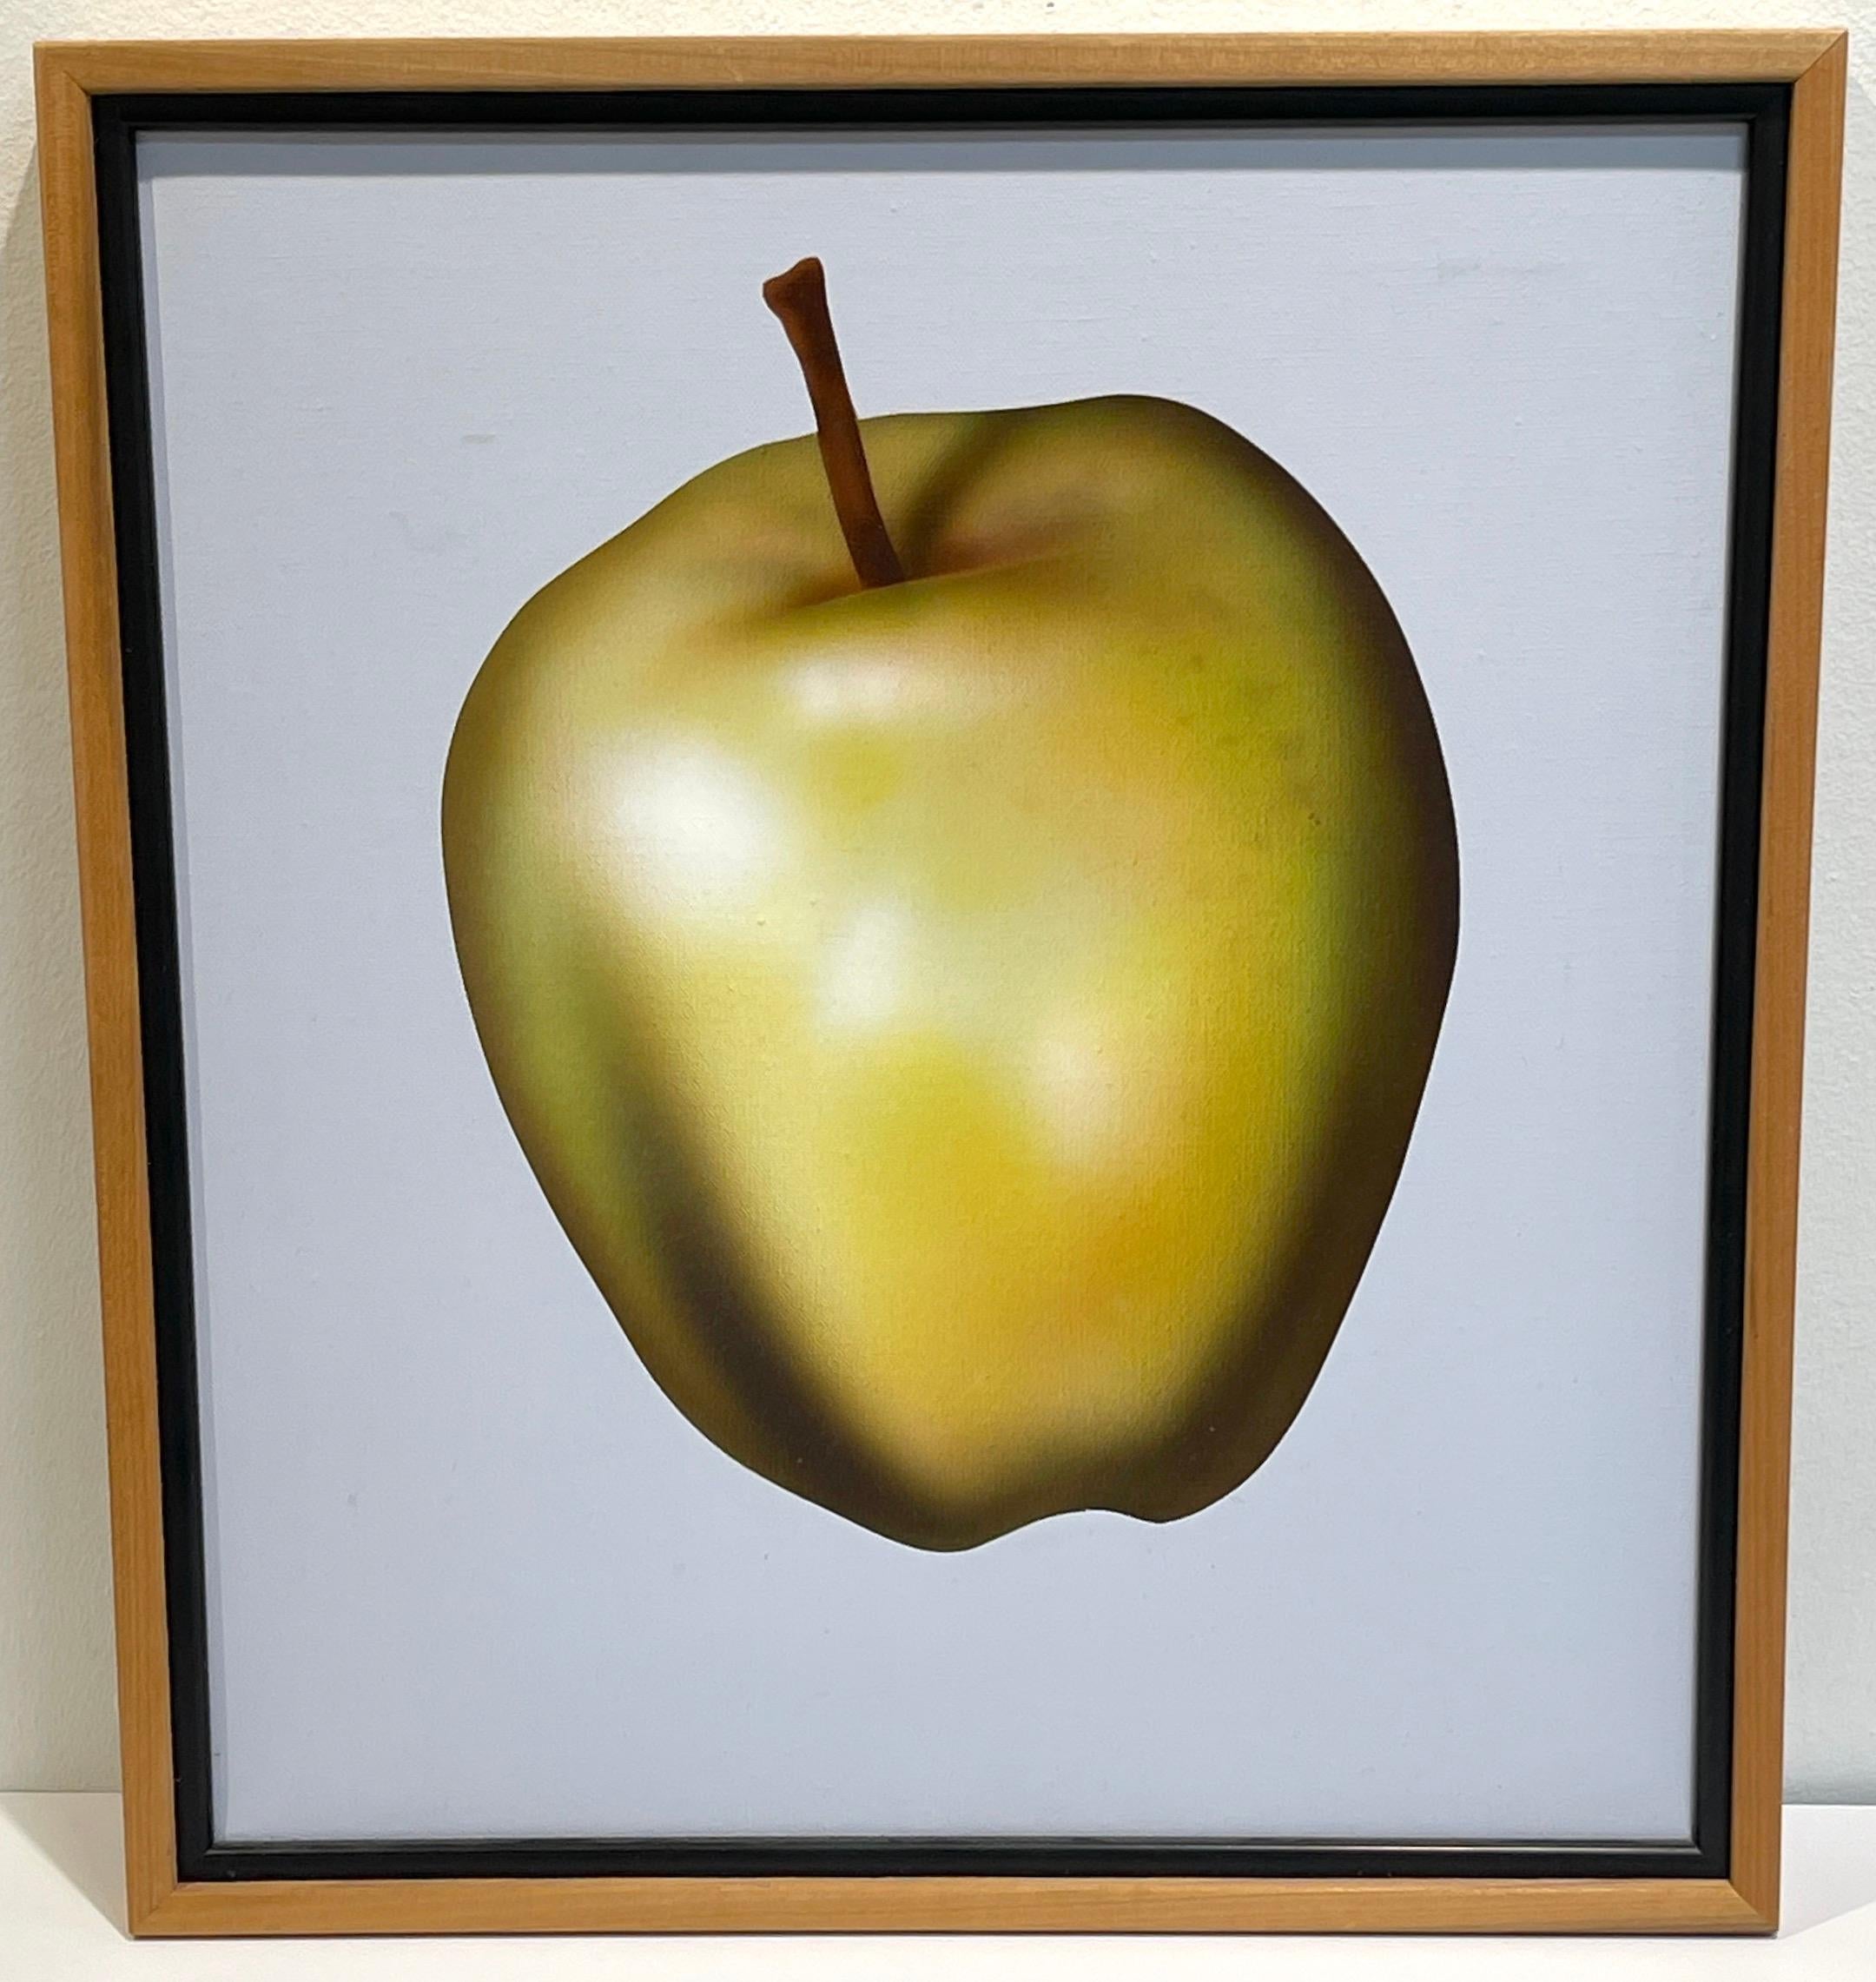 Clarence Measelle (American, b. 1947) Green Apple, 1983
Acrylic on canvas, signed on verso
Canvas 16 x 16 inches, Framed 17.5 x 17.5 inches 

Immerse yourself in the captivating allure of this exquisite work by Clarence Measelle, executed in 1983.